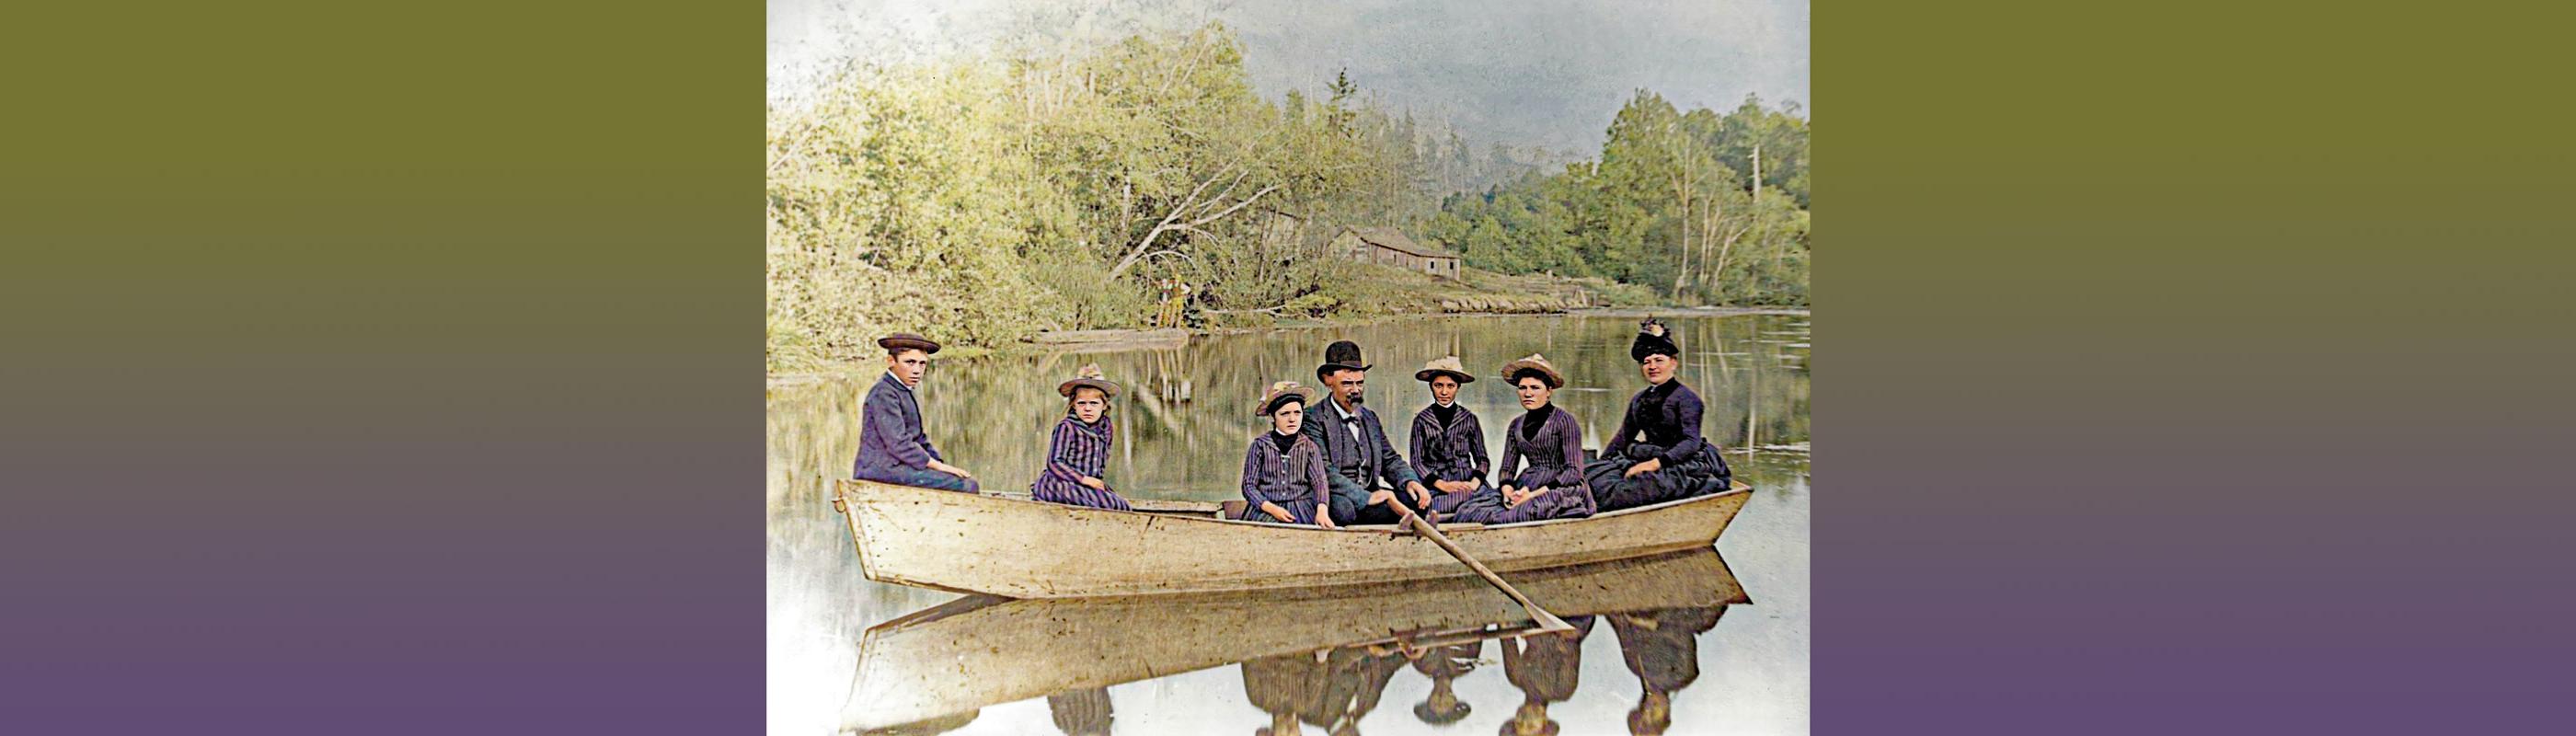 colorized historical photo of people in a canoe